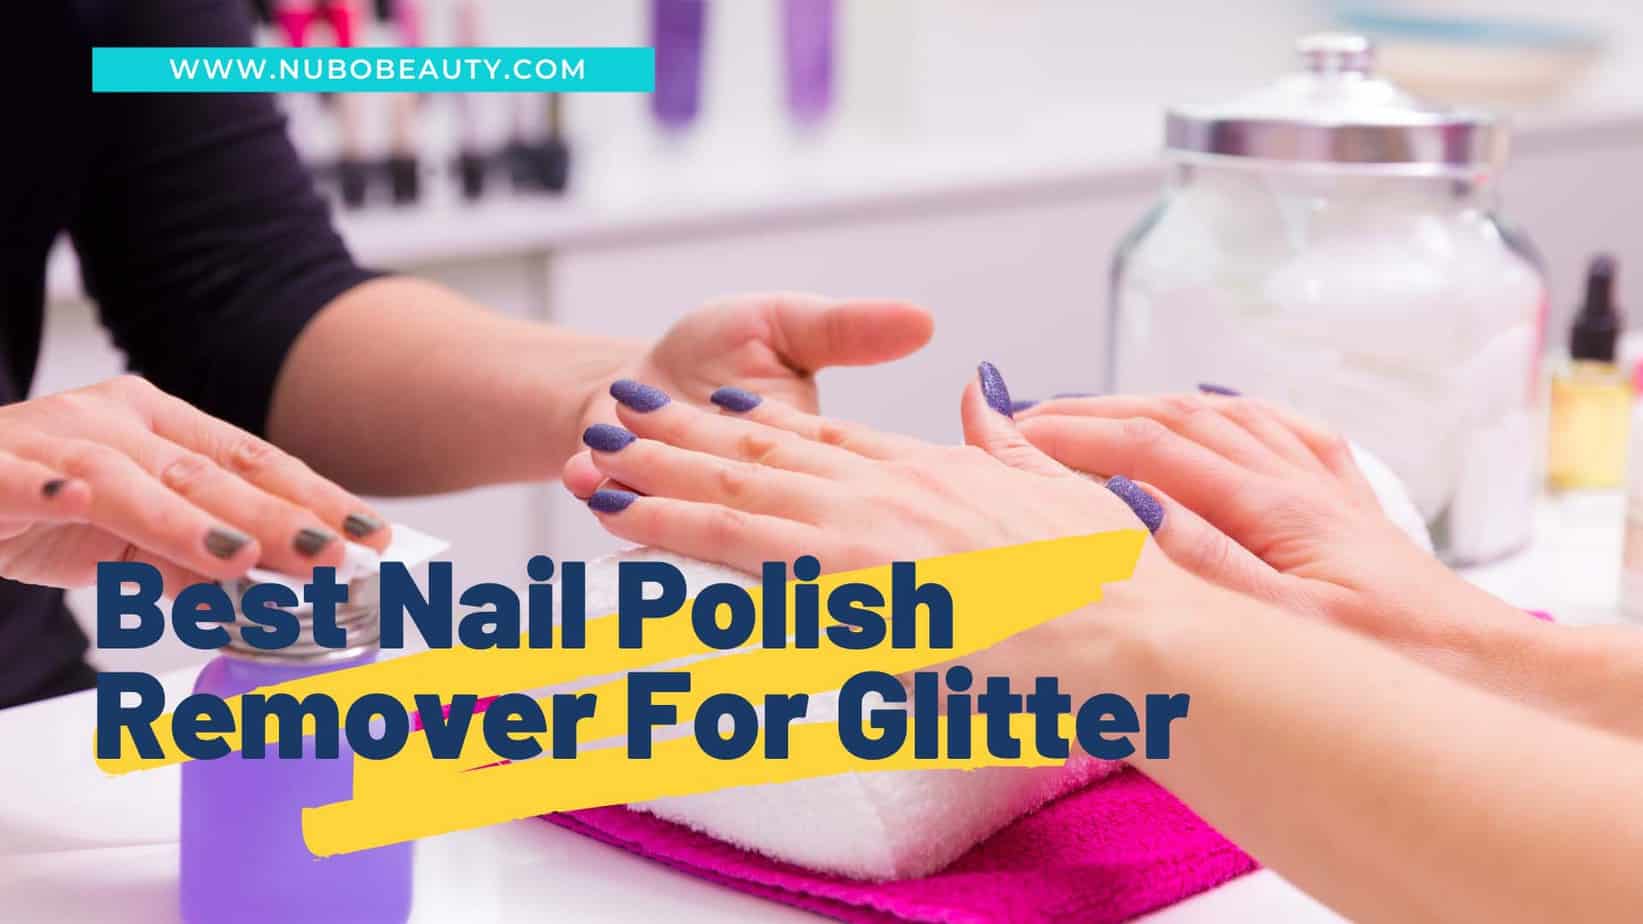 5 Best Nail Polish Remover For Glitter You Should Check Out